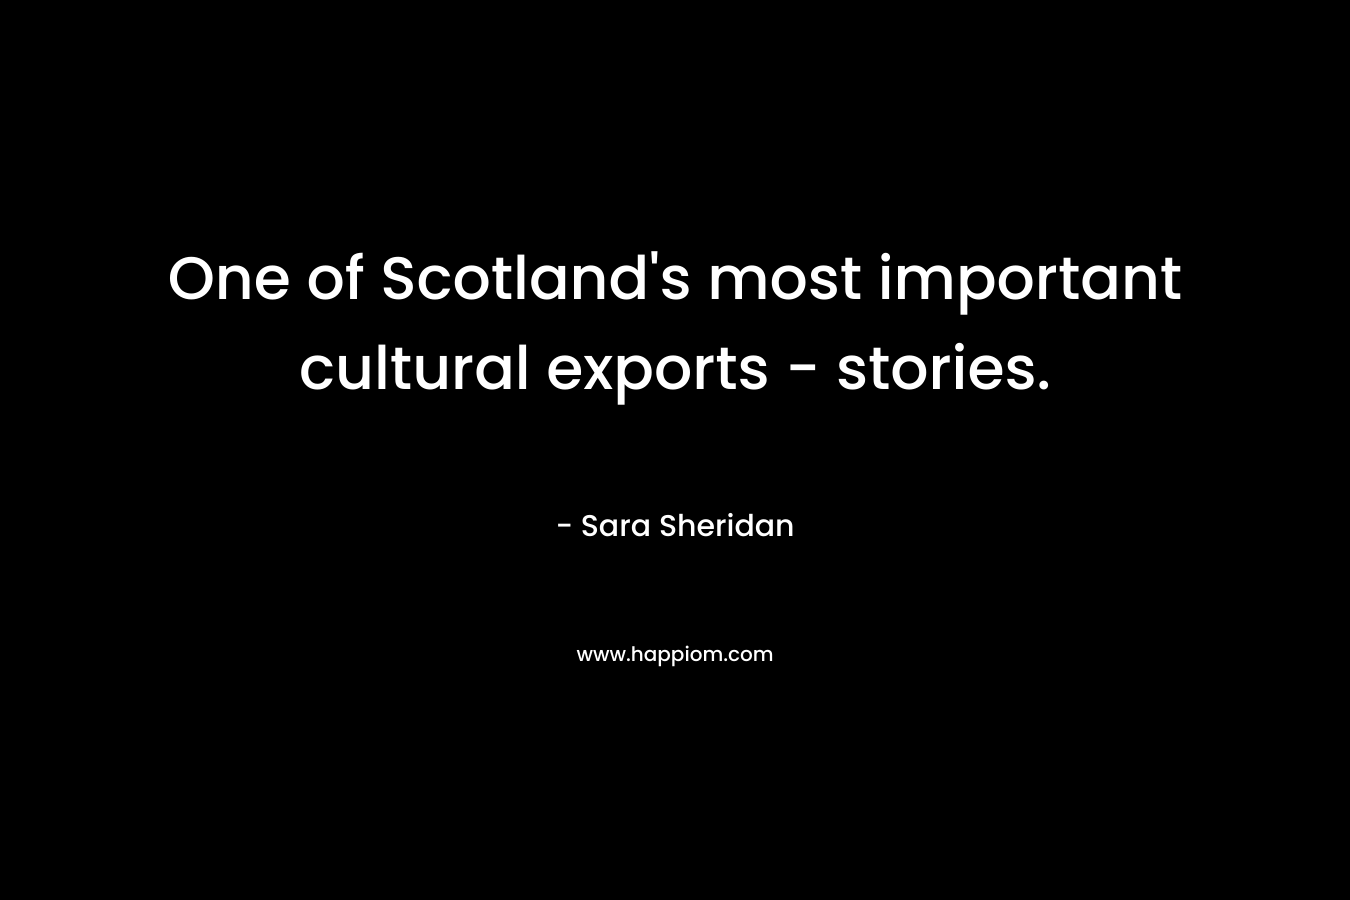 One of Scotland’s most important cultural exports – stories. – Sara Sheridan